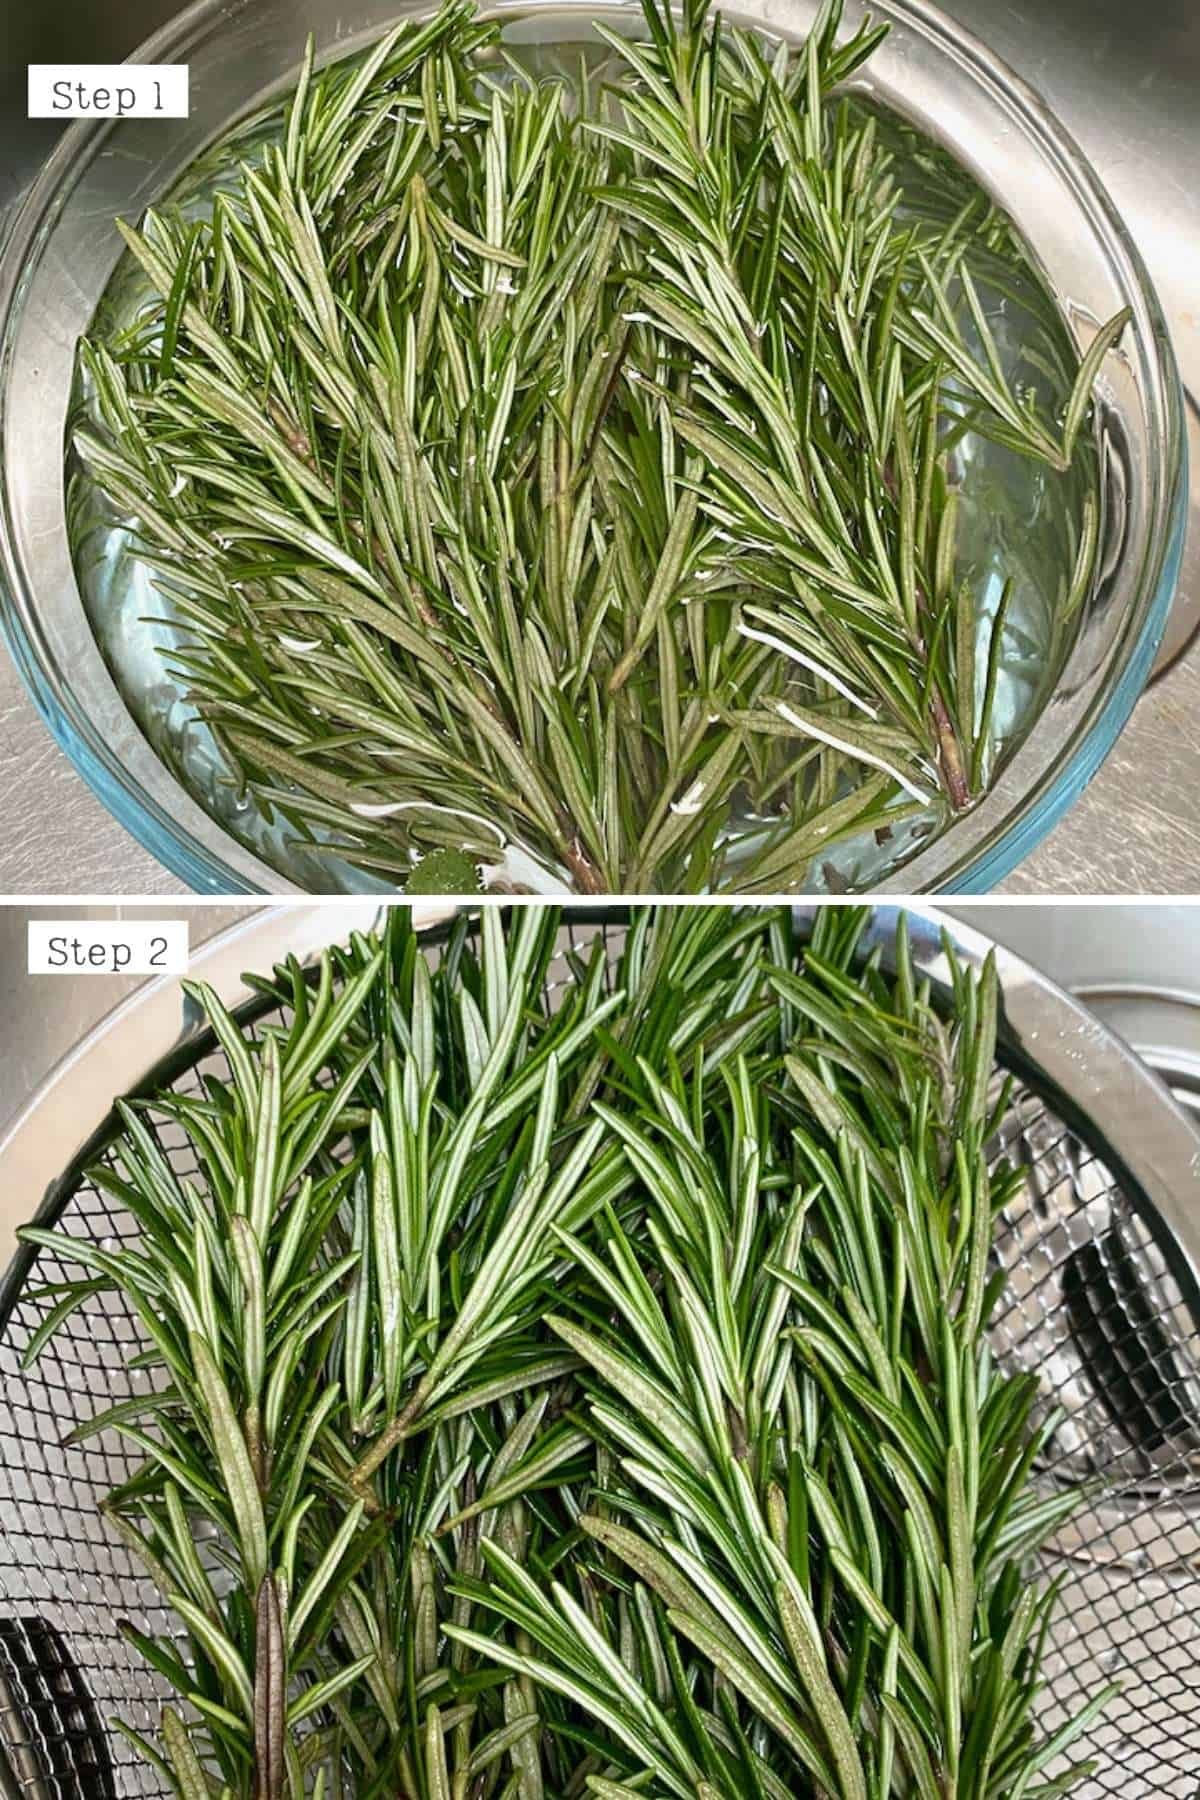 Steps for washing rosemary